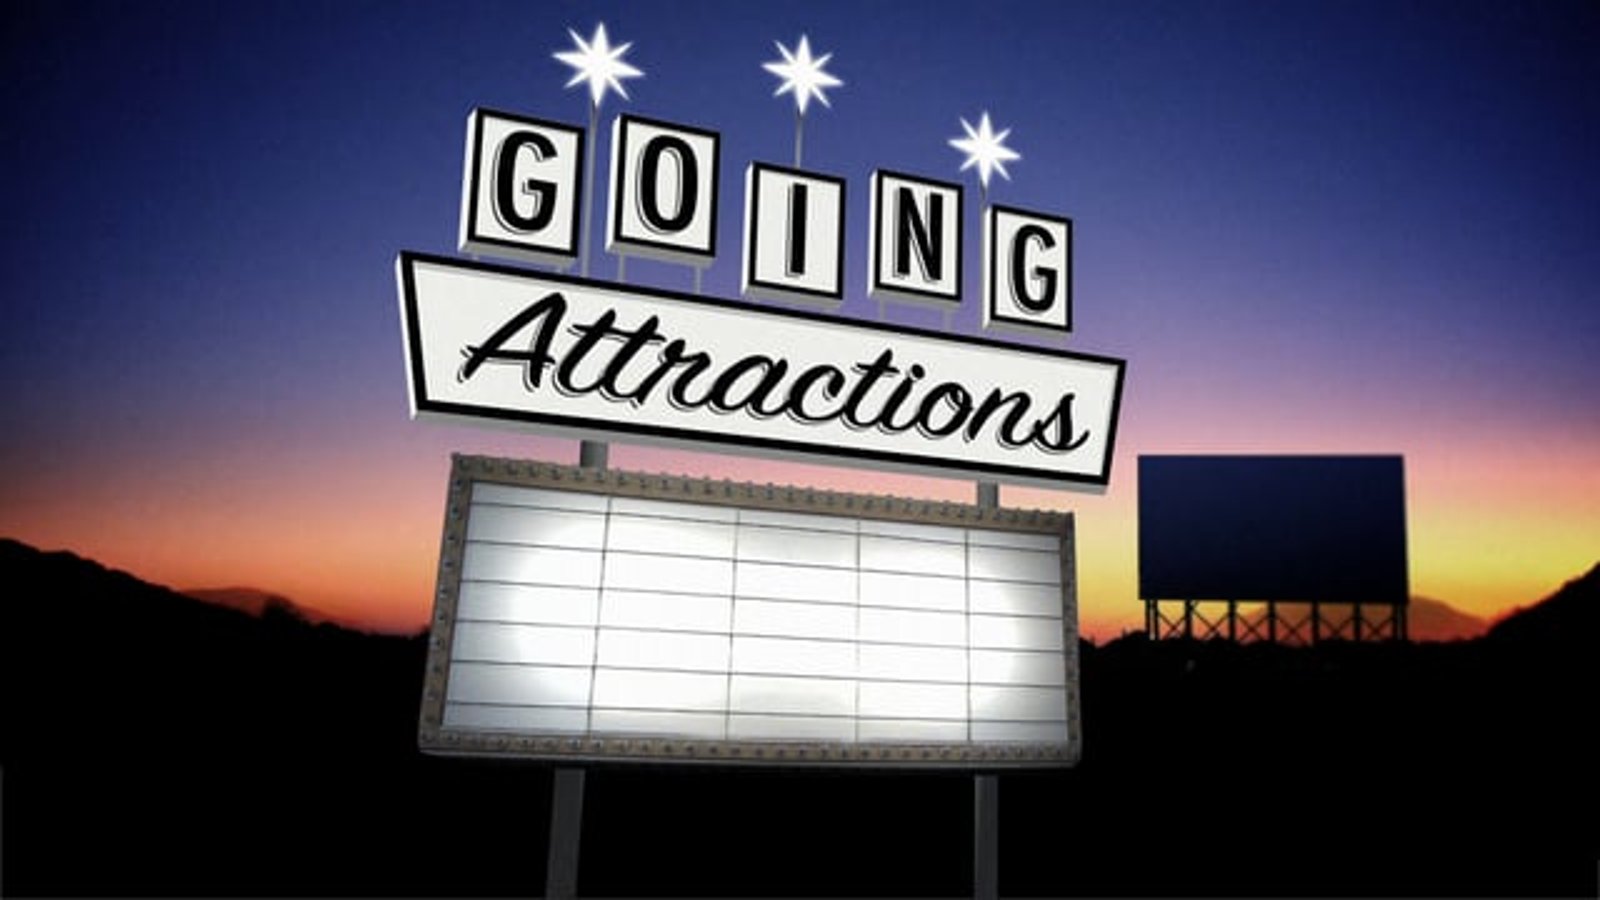 Going Attractions - The Definitive Story of the American Drive-In Movie